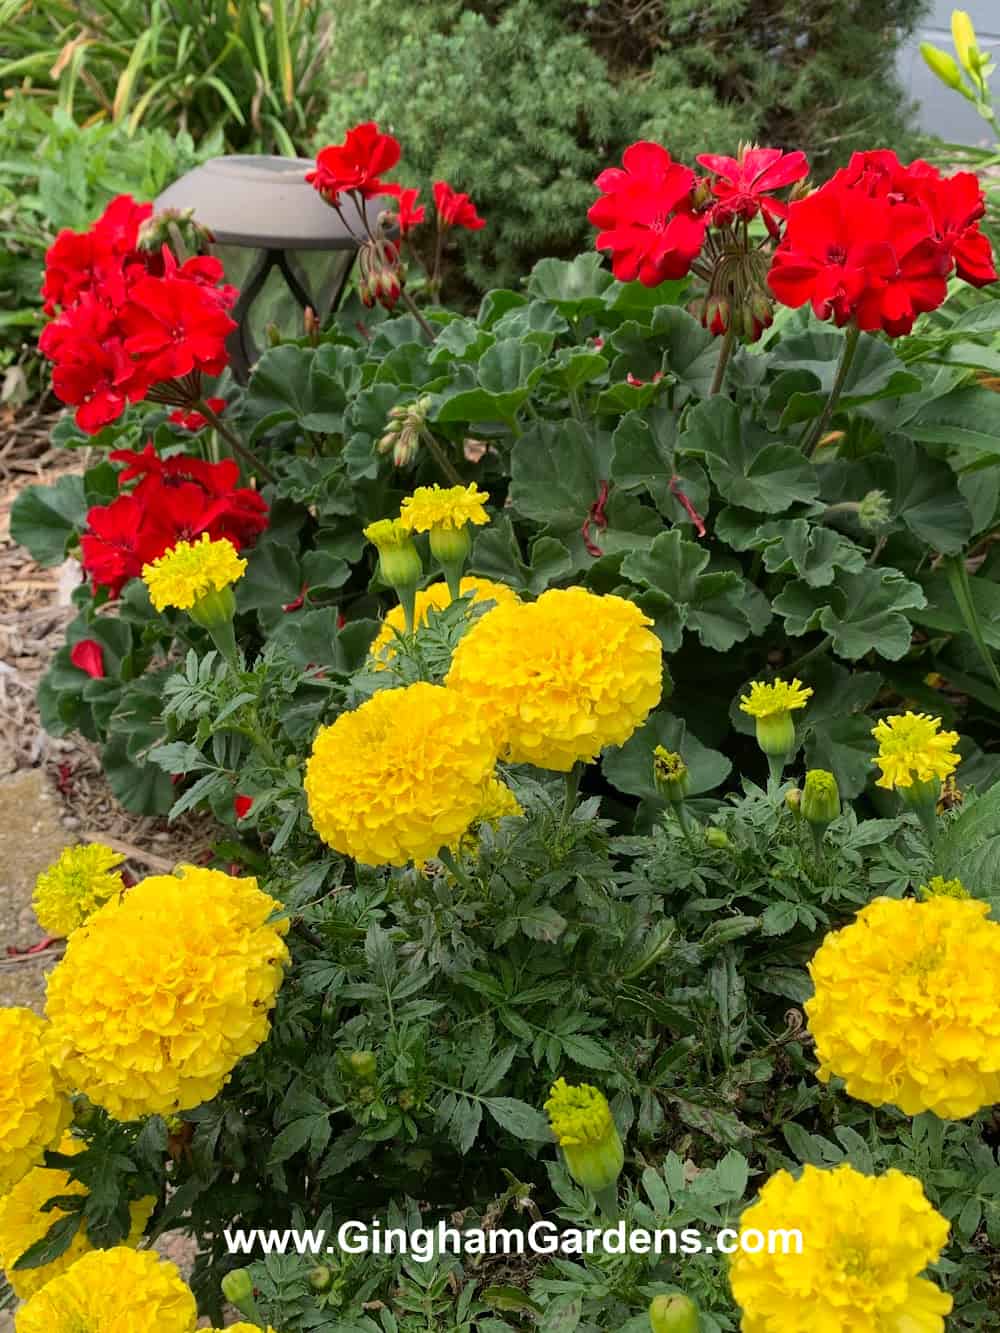 Red Geraniums and Yellow marigolds - color combinations in a flower garden